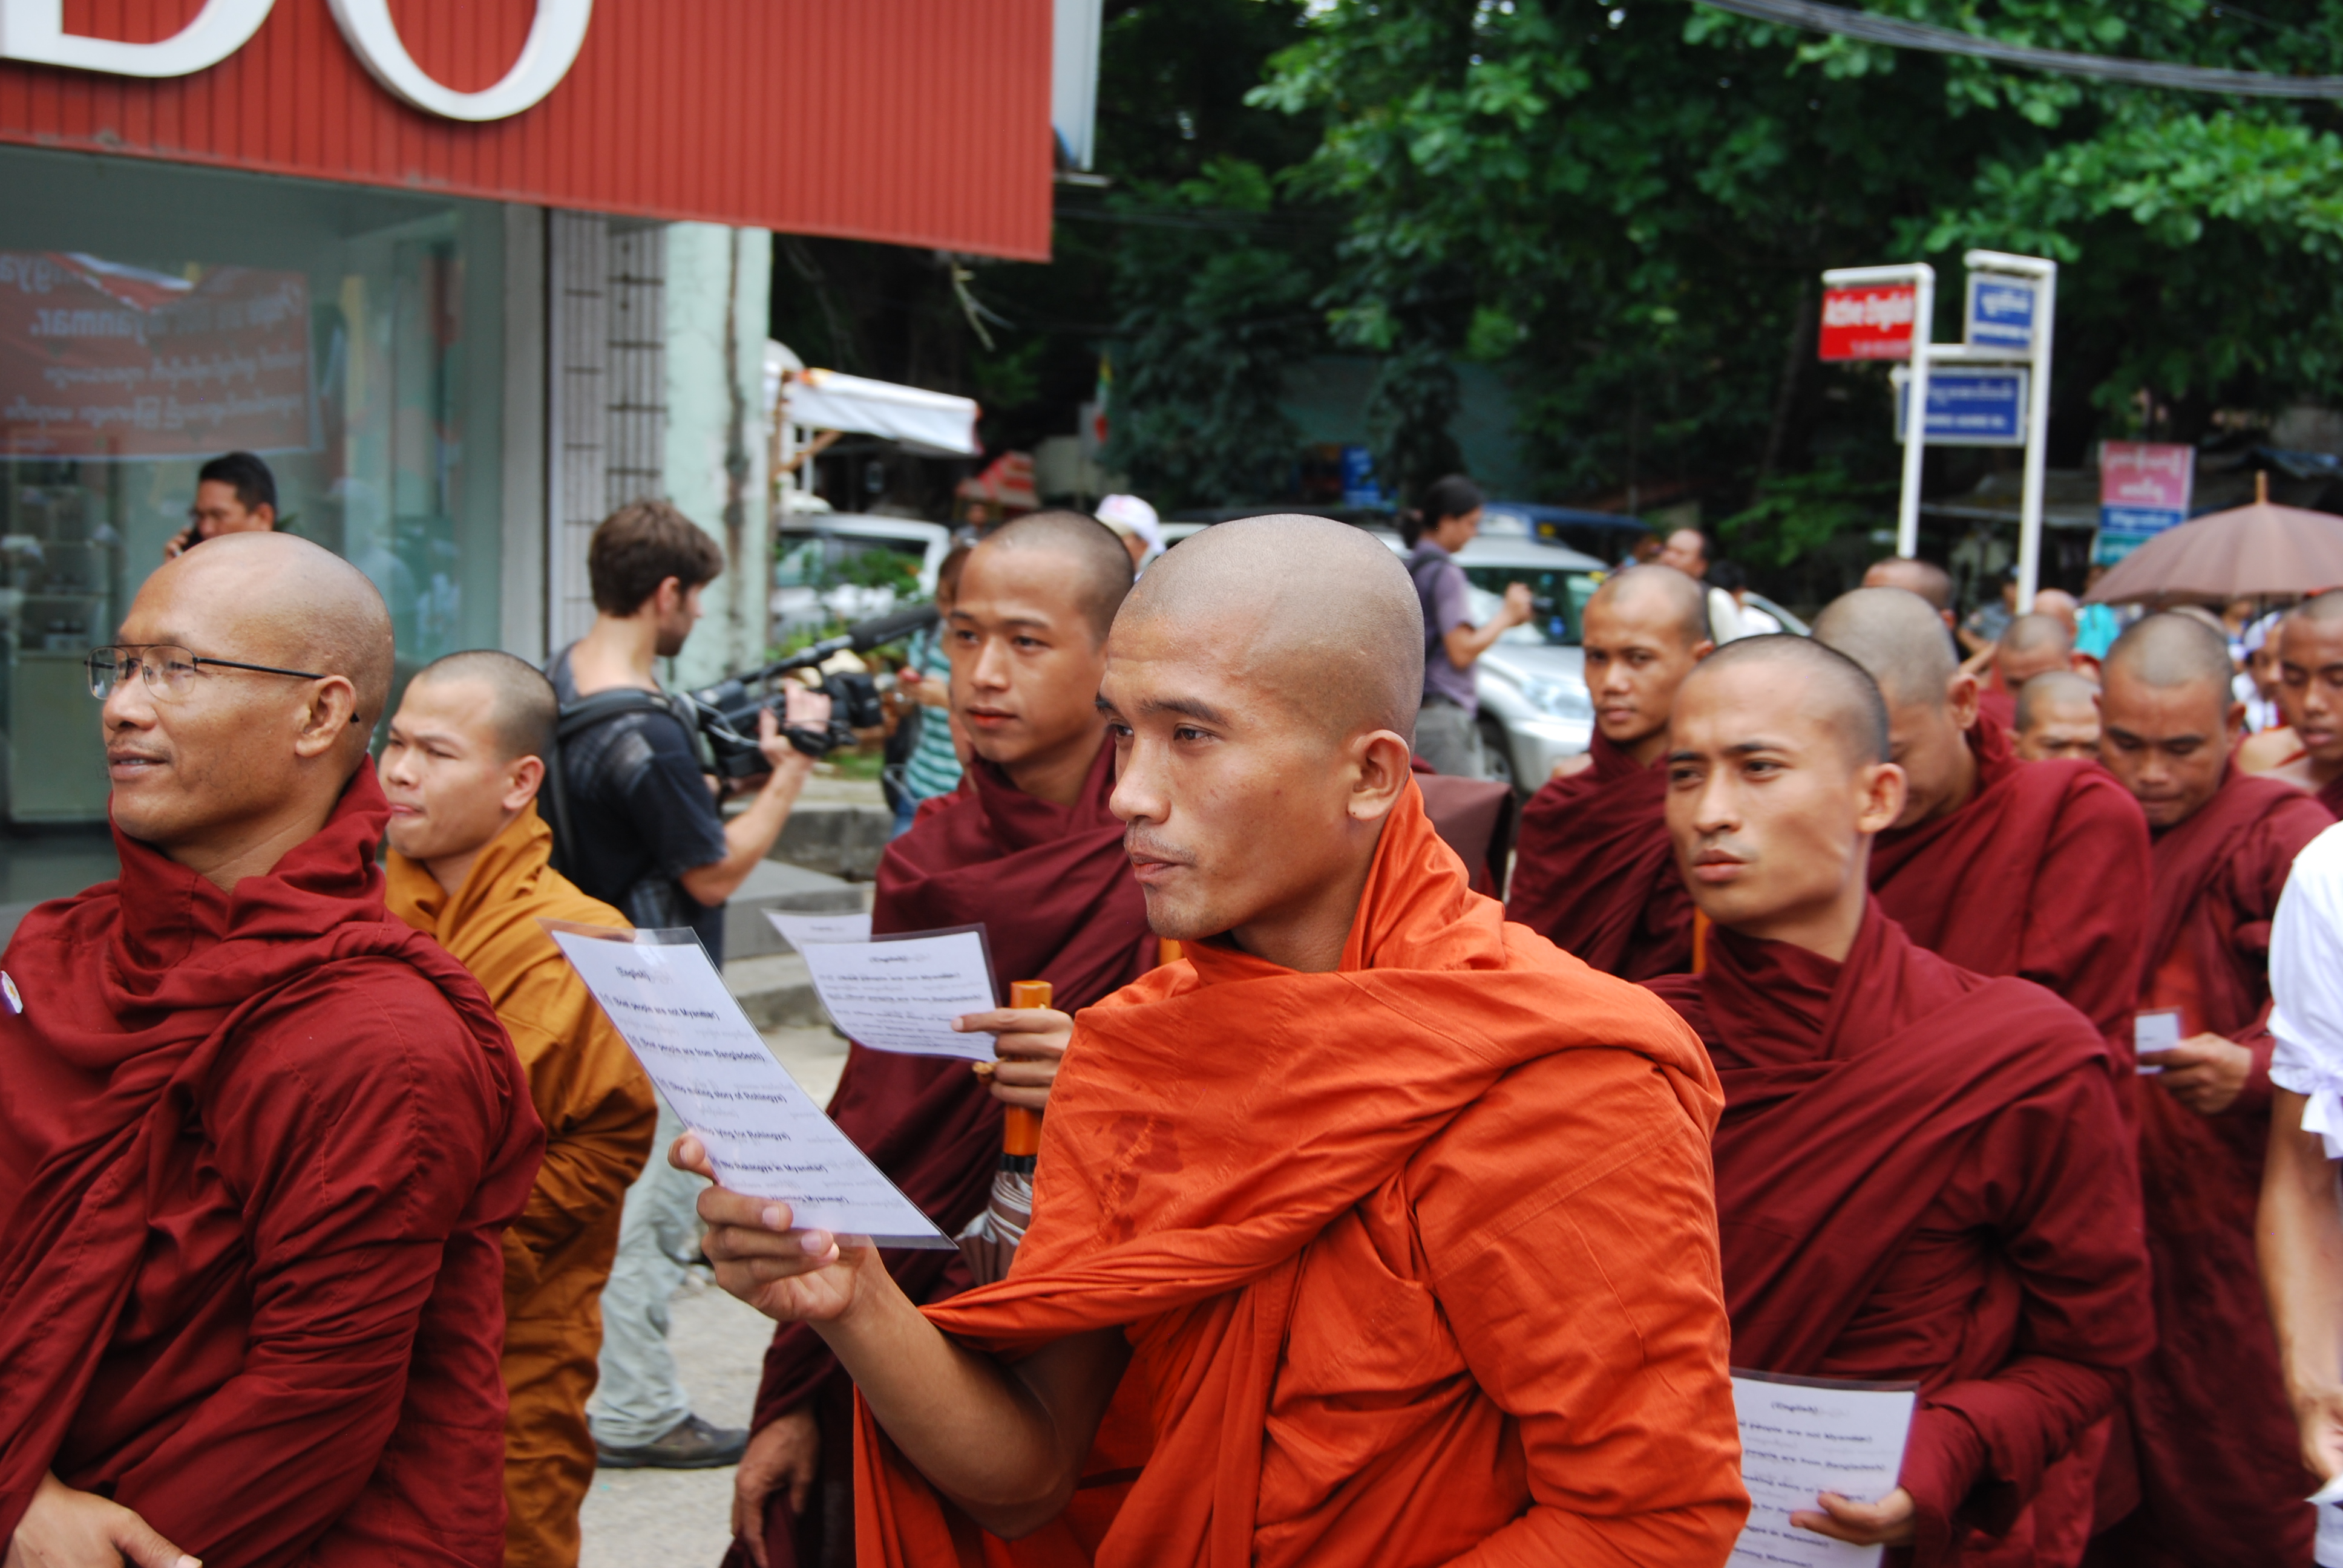 Buddhist monks protest UN refugee policies in Yangon in 2015. Photo: Jacob Goldberg